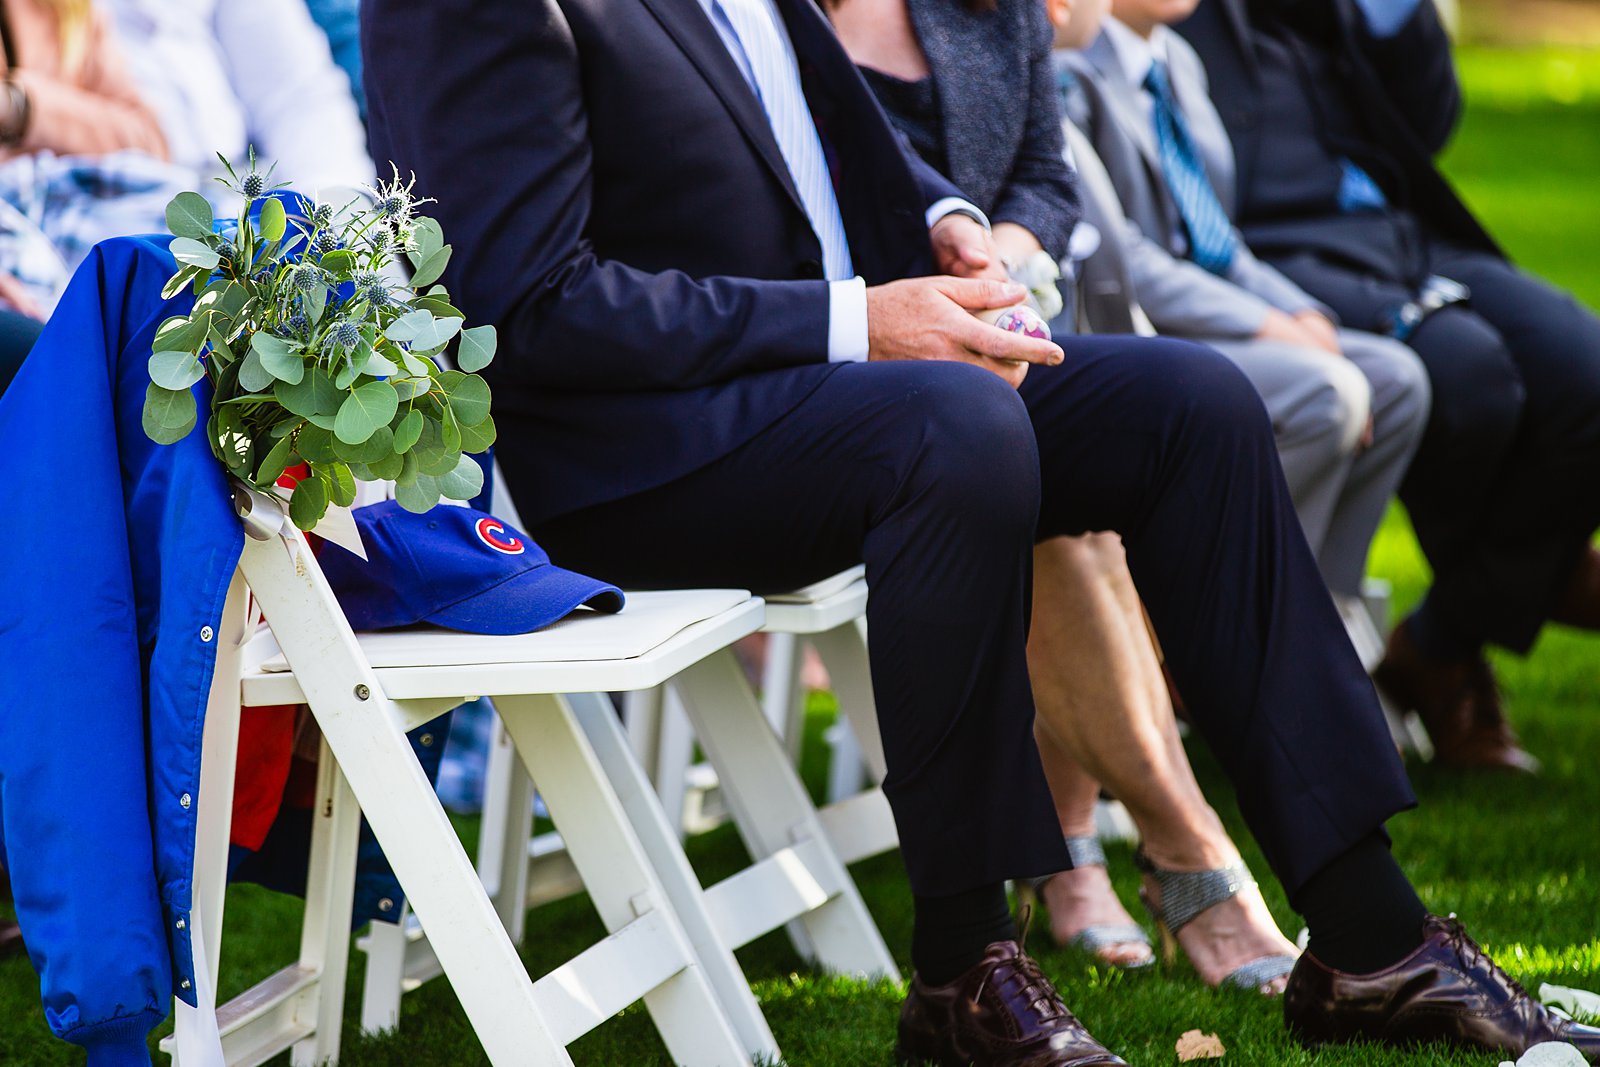 Remembrance chair with bride's father's cubs jacket and hat at the wedding ceremon by Arizona wedding photographer PMA Photography.